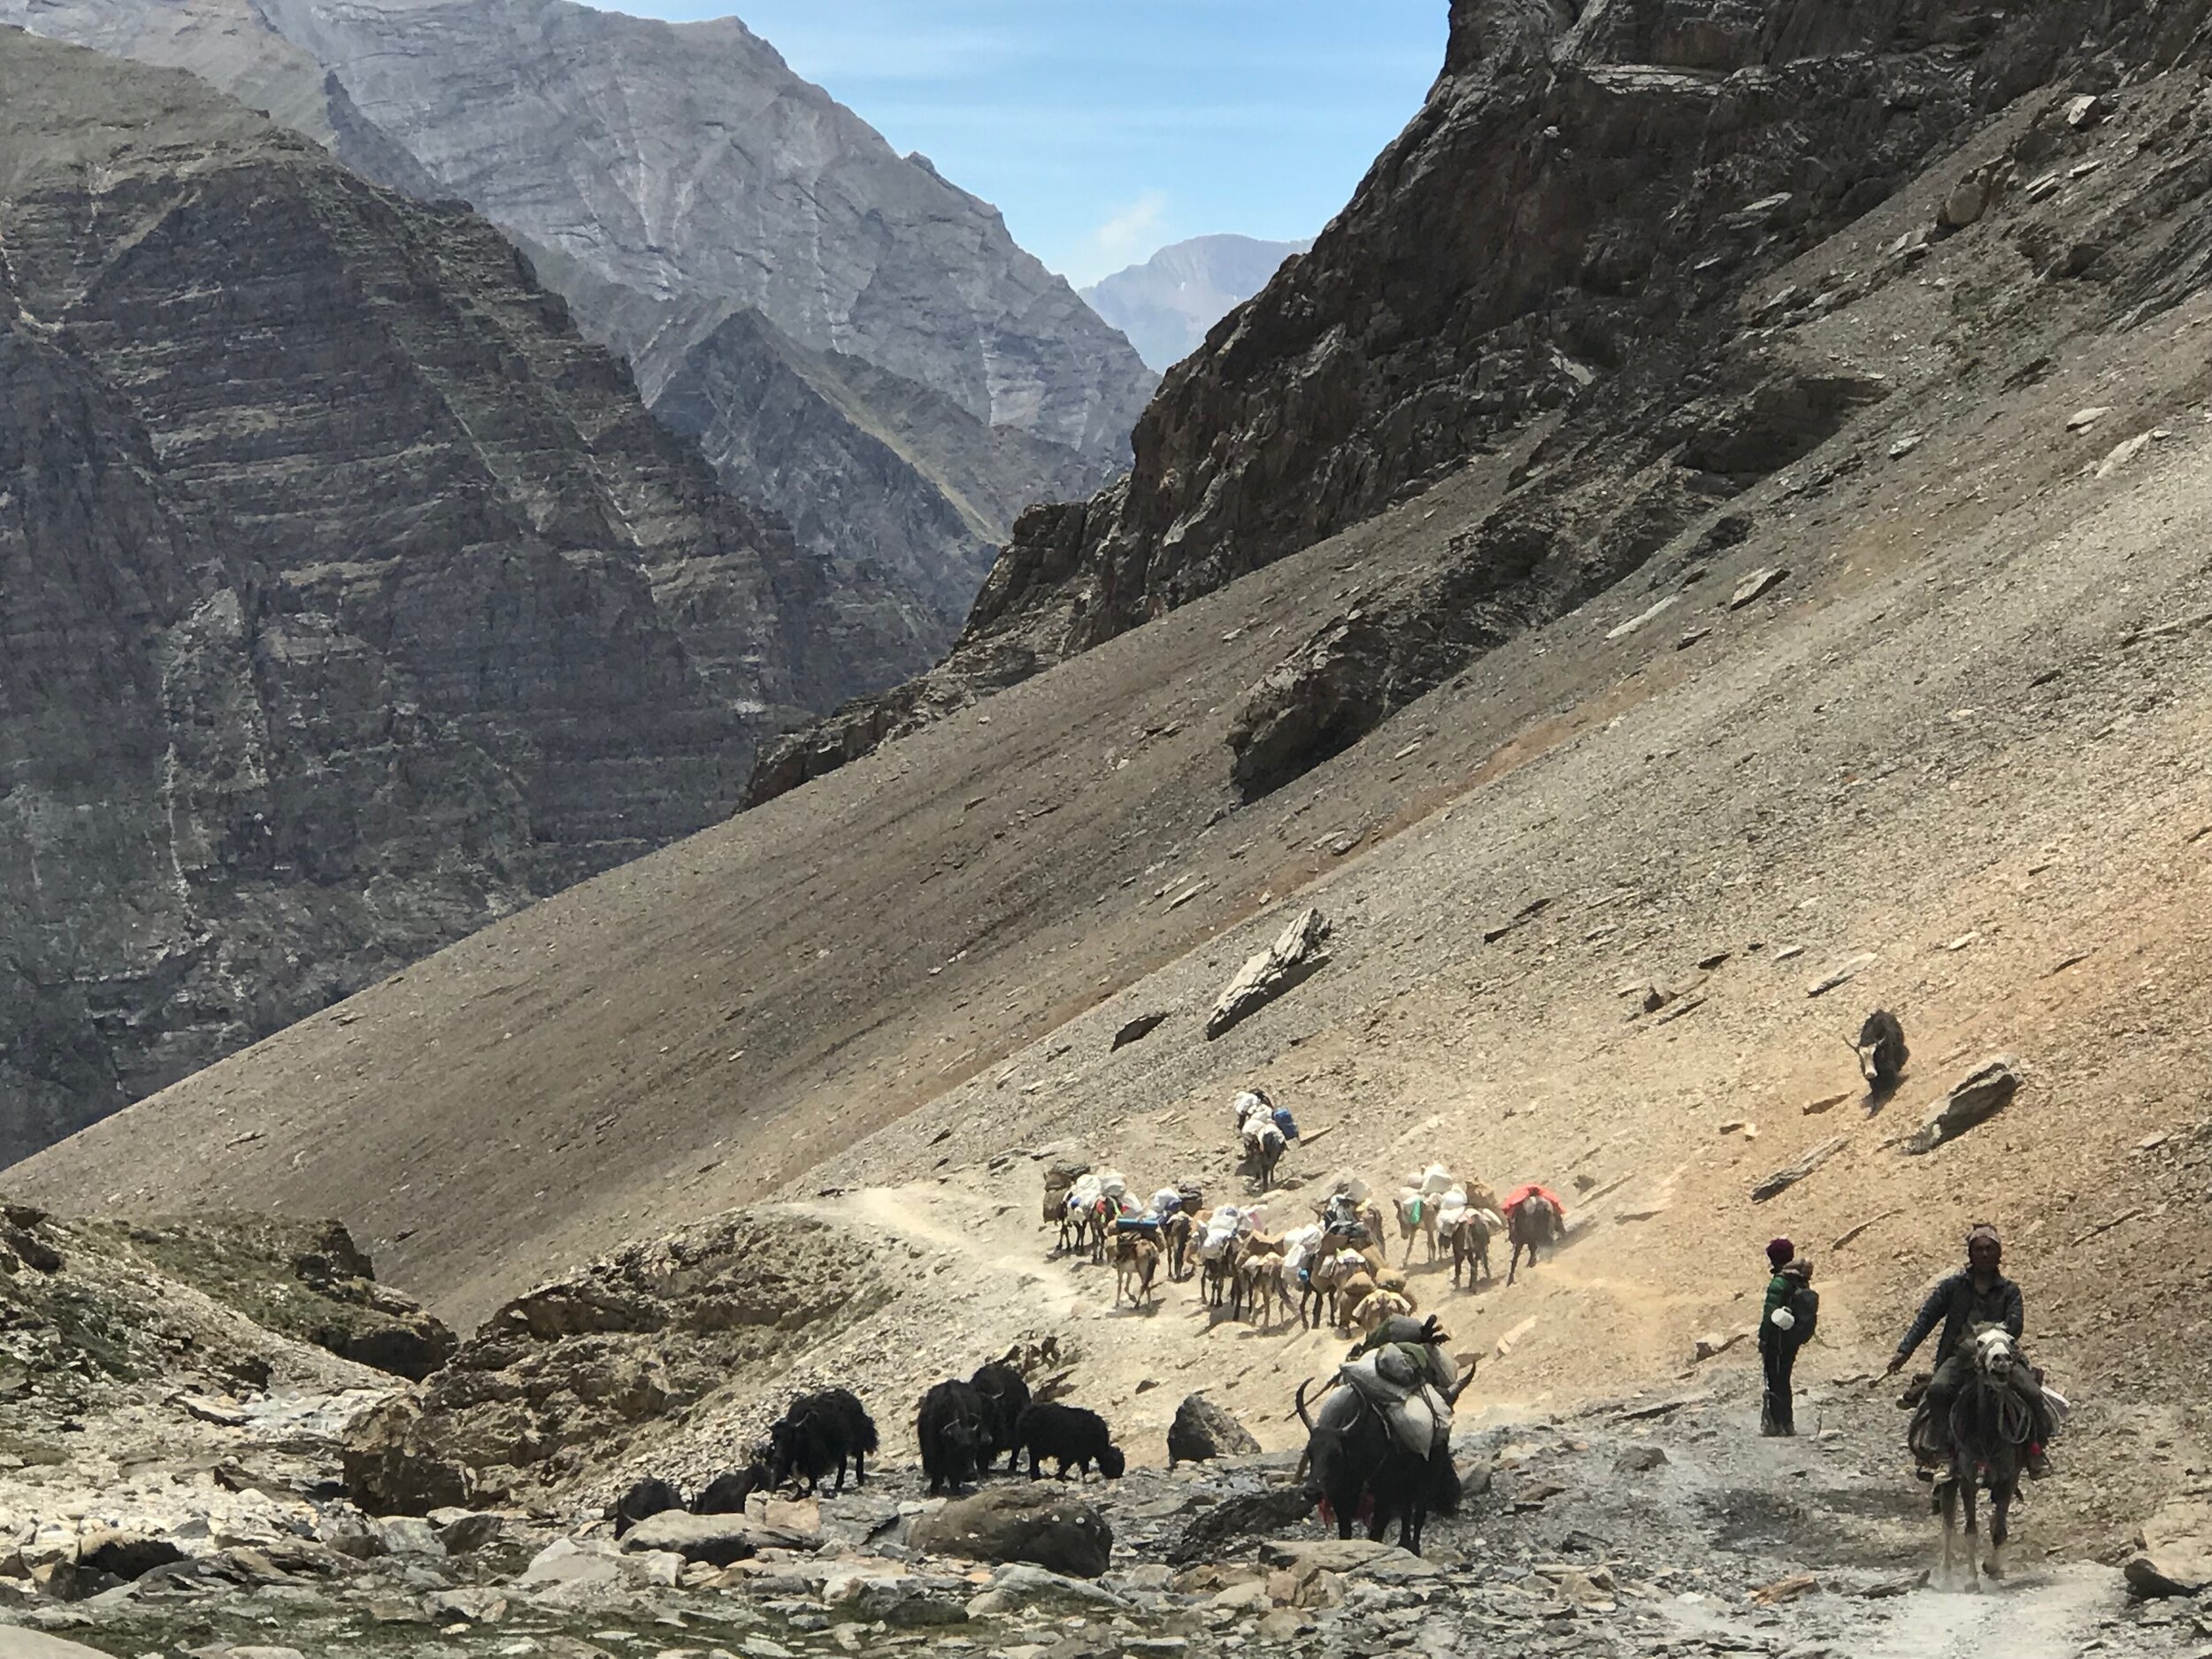 30 Yaks and Mules in upper Dolpo Section 6.jpg